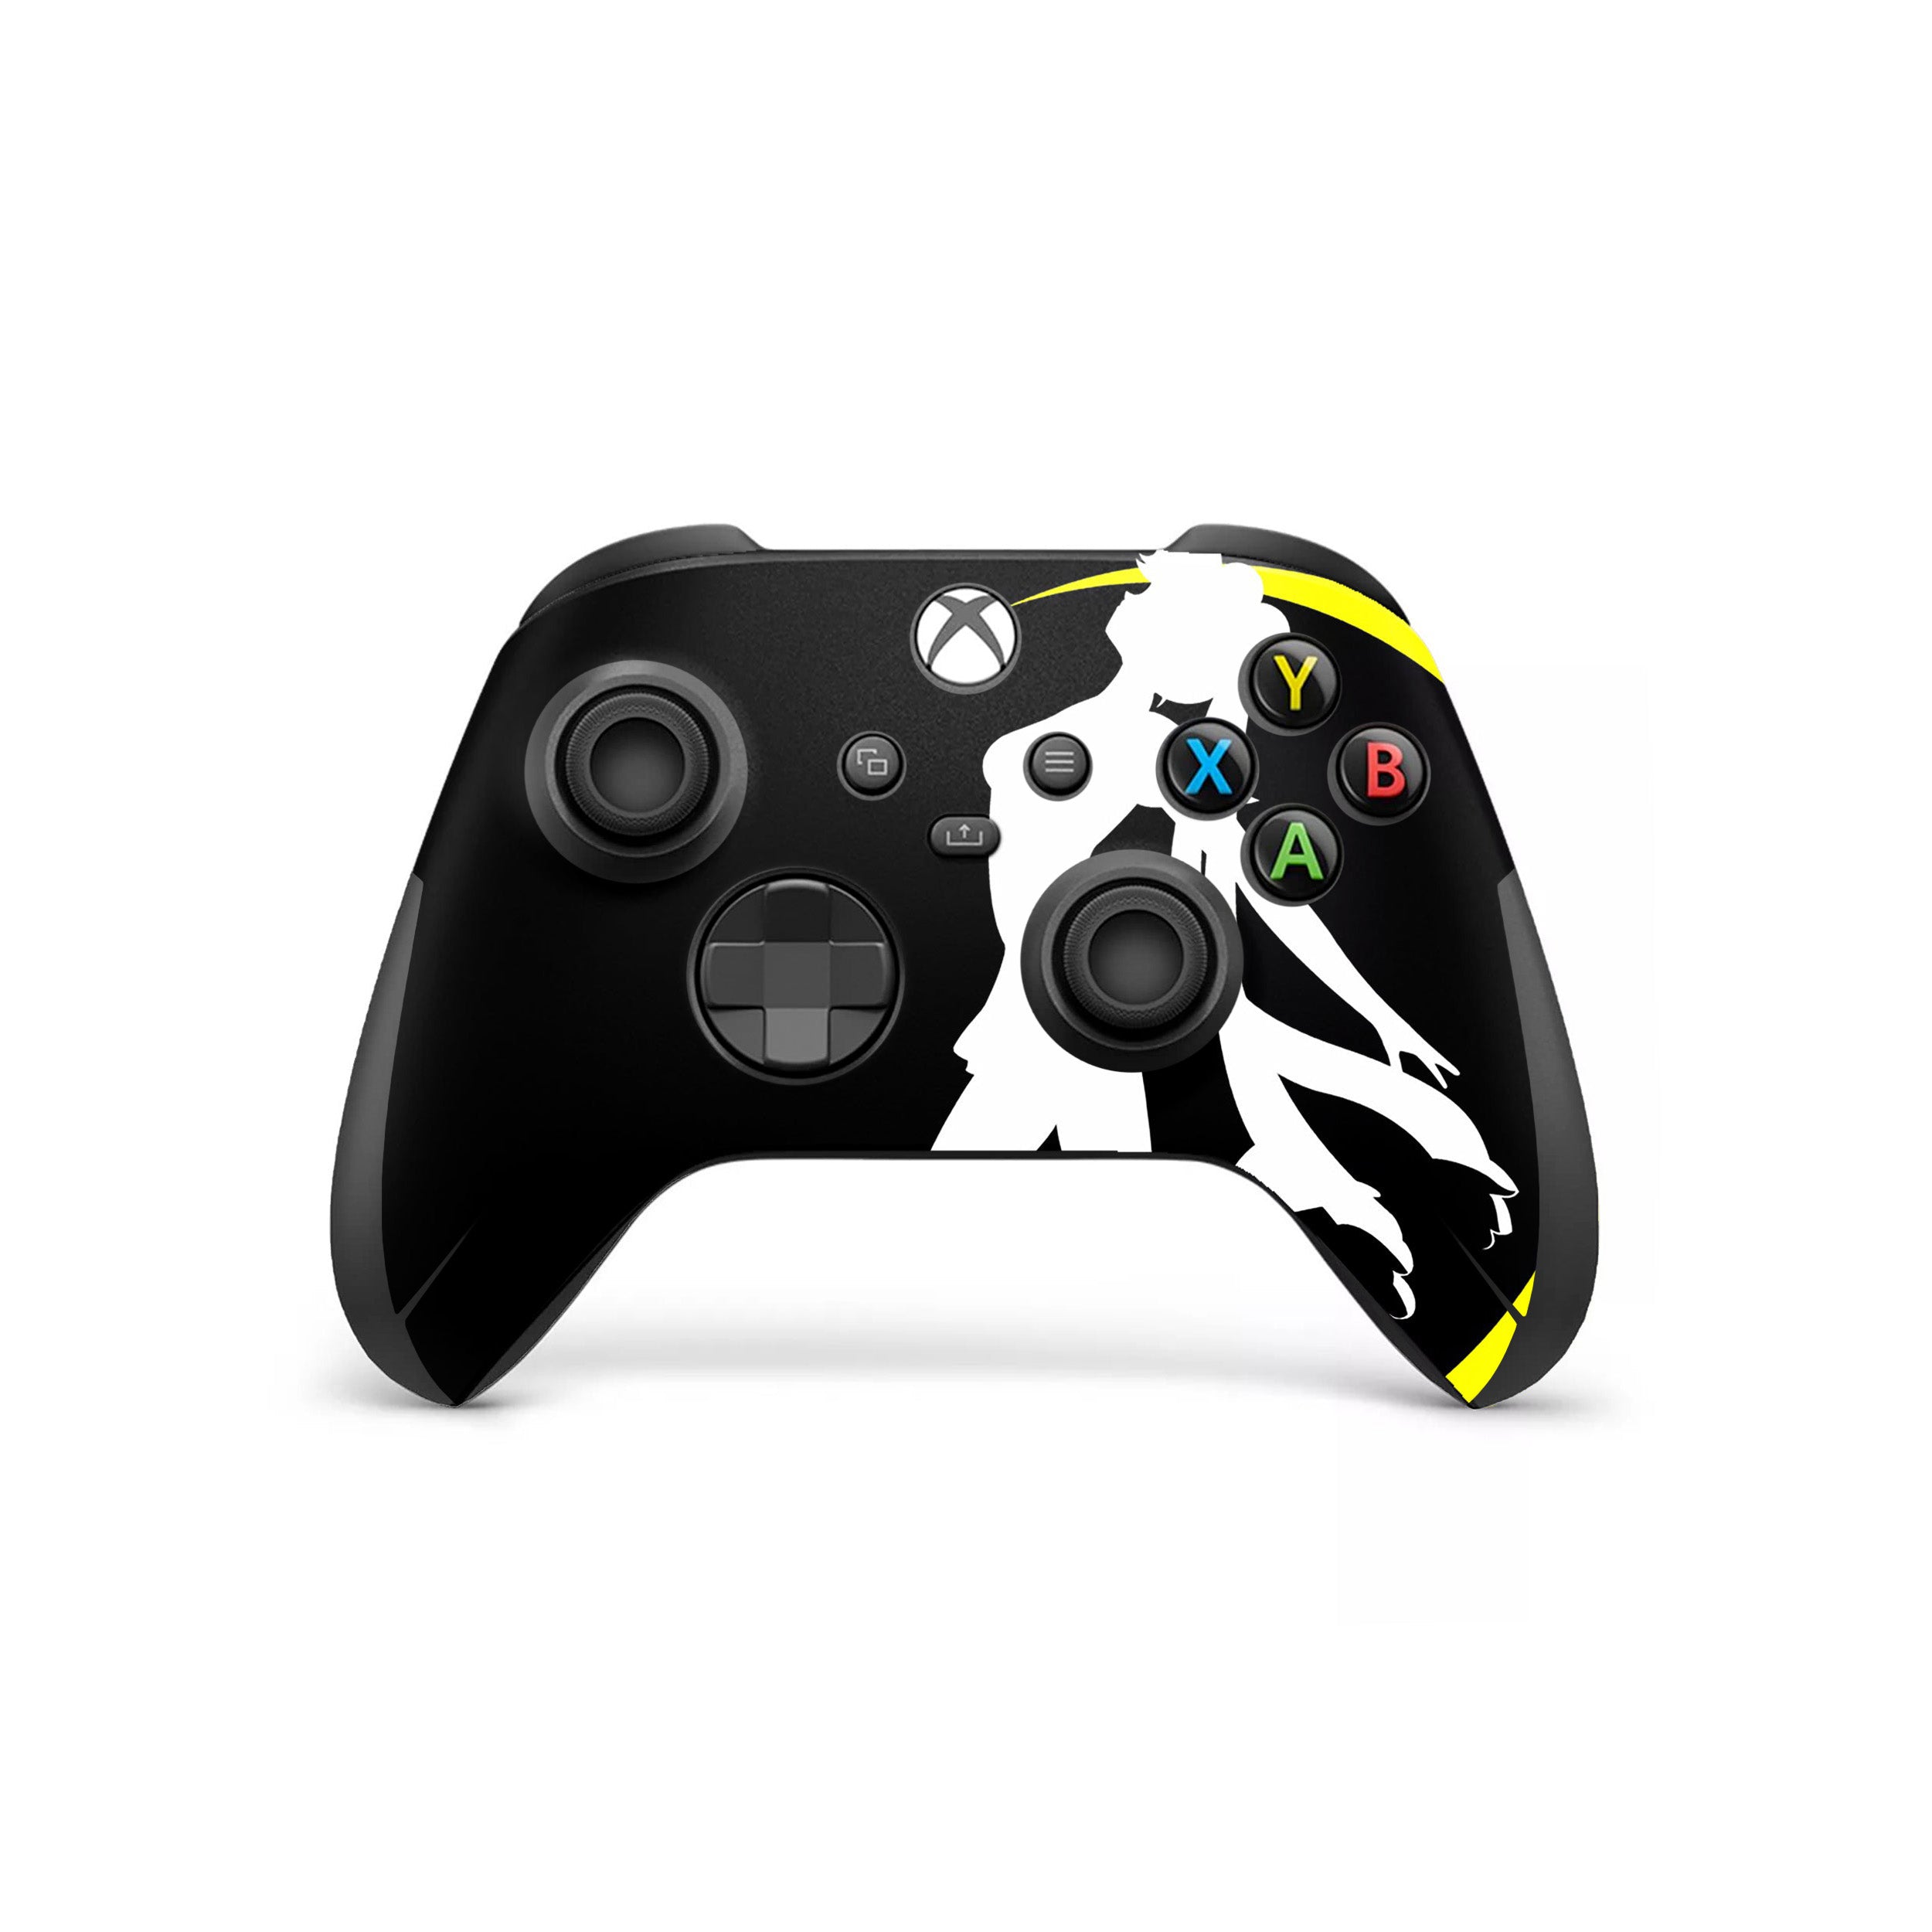 A video game skin featuring a Sailor Moon design for the Xbox Wireless Controller.